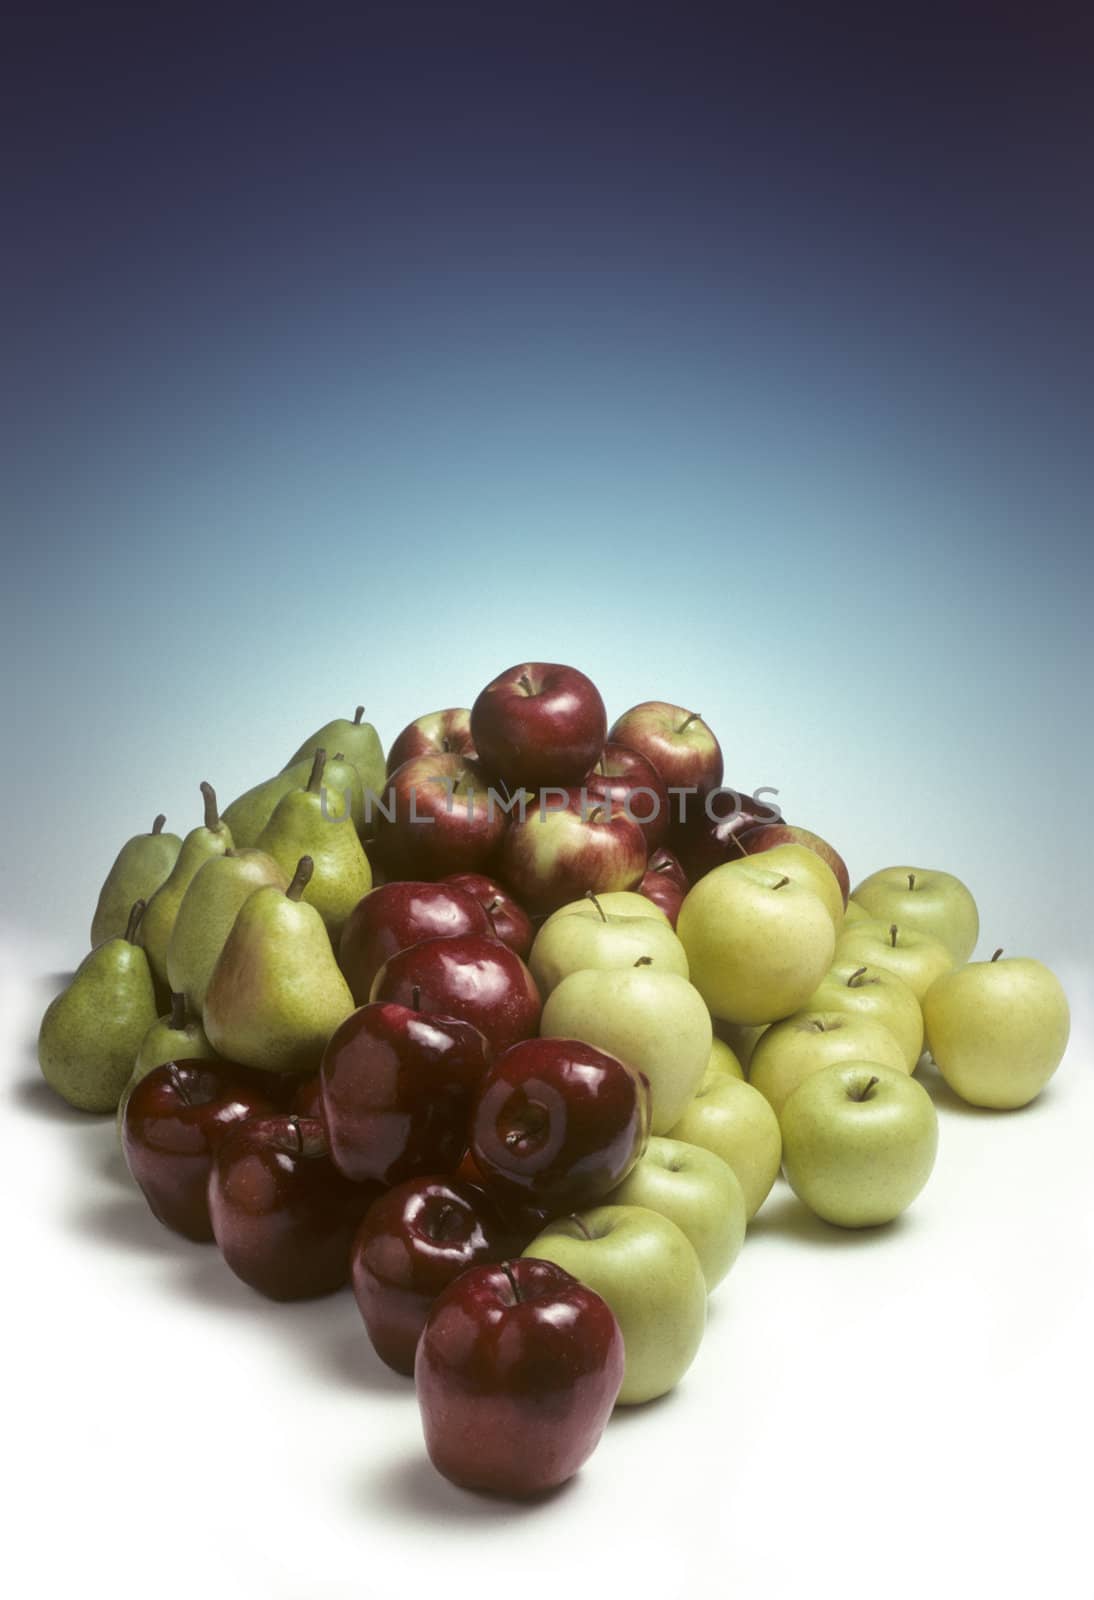 A pile of a variety of apples and pears